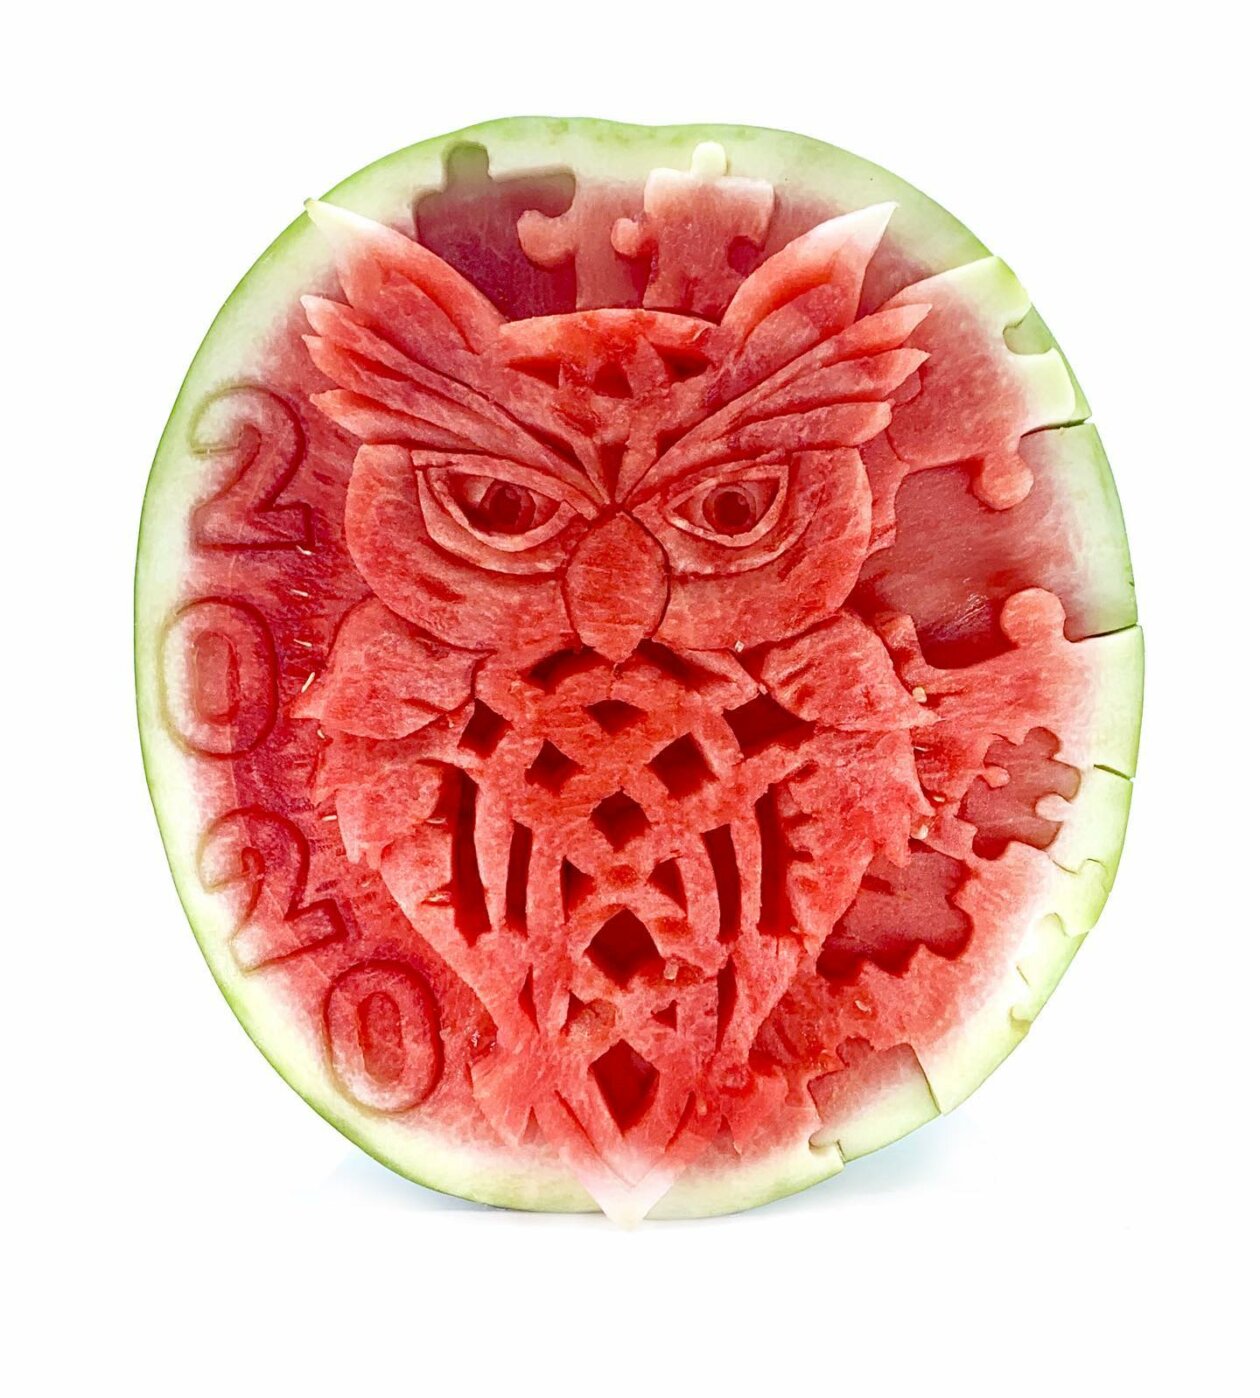 Superb Fruit And Vegetable Carvings By Daniele Barresi 3